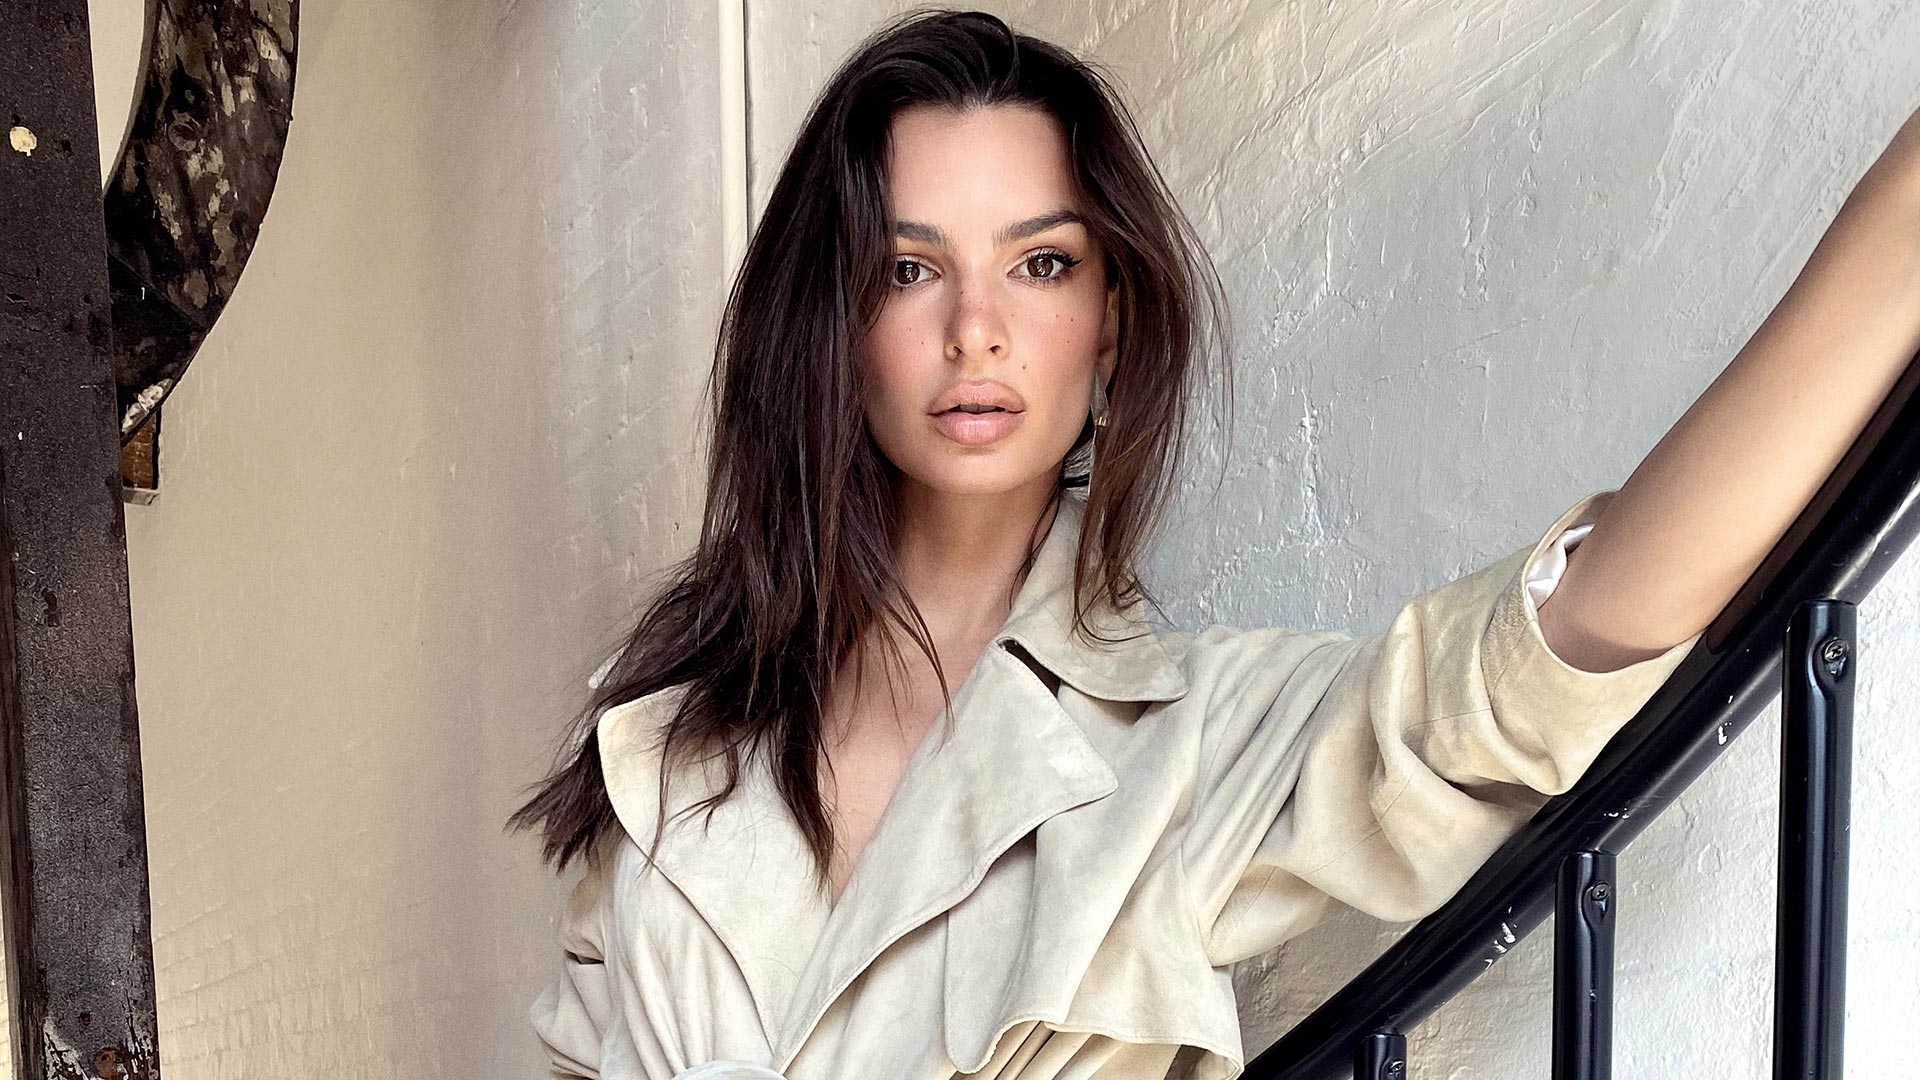 1080x224020 Emily Ratajkowski GQ 2020 1080x224020 Resolution Wallpaper, HD  Celebrities 4K Wallpapers, Images, Photos and Background - Wallpapers Den